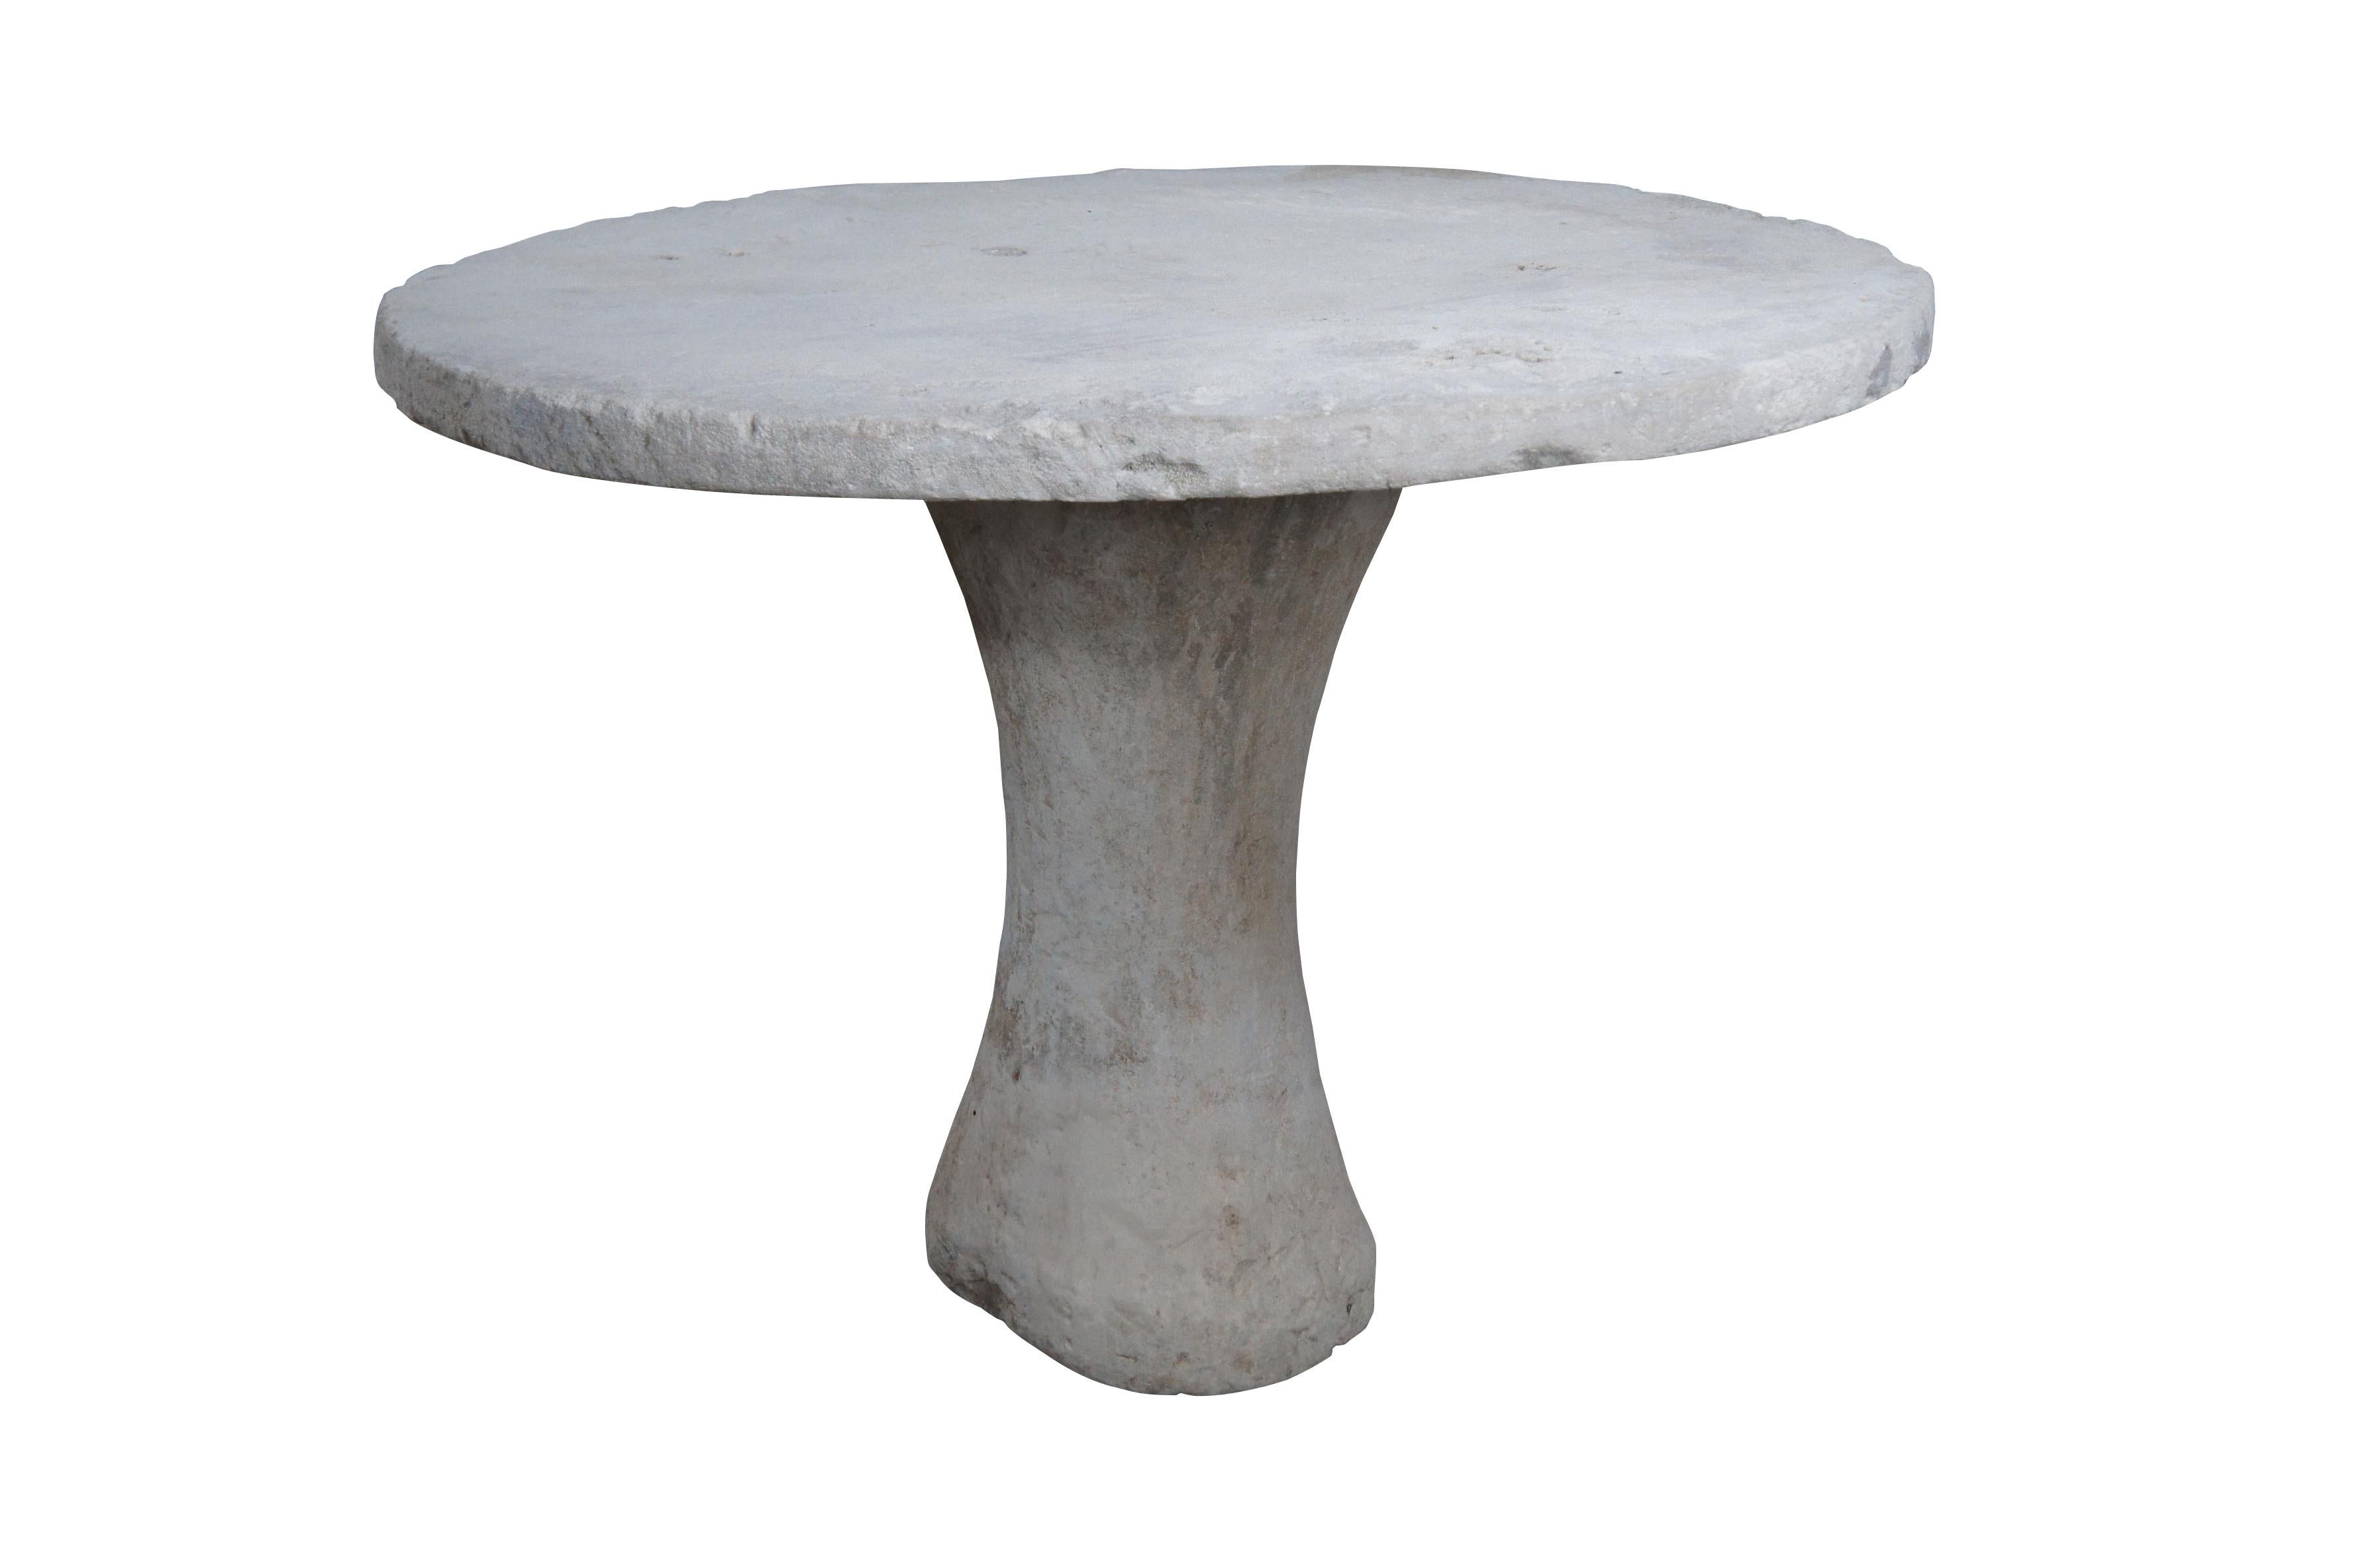 Vintage primitive style stone table featuring a pedestal base and round top. Very heavy, two pieces.